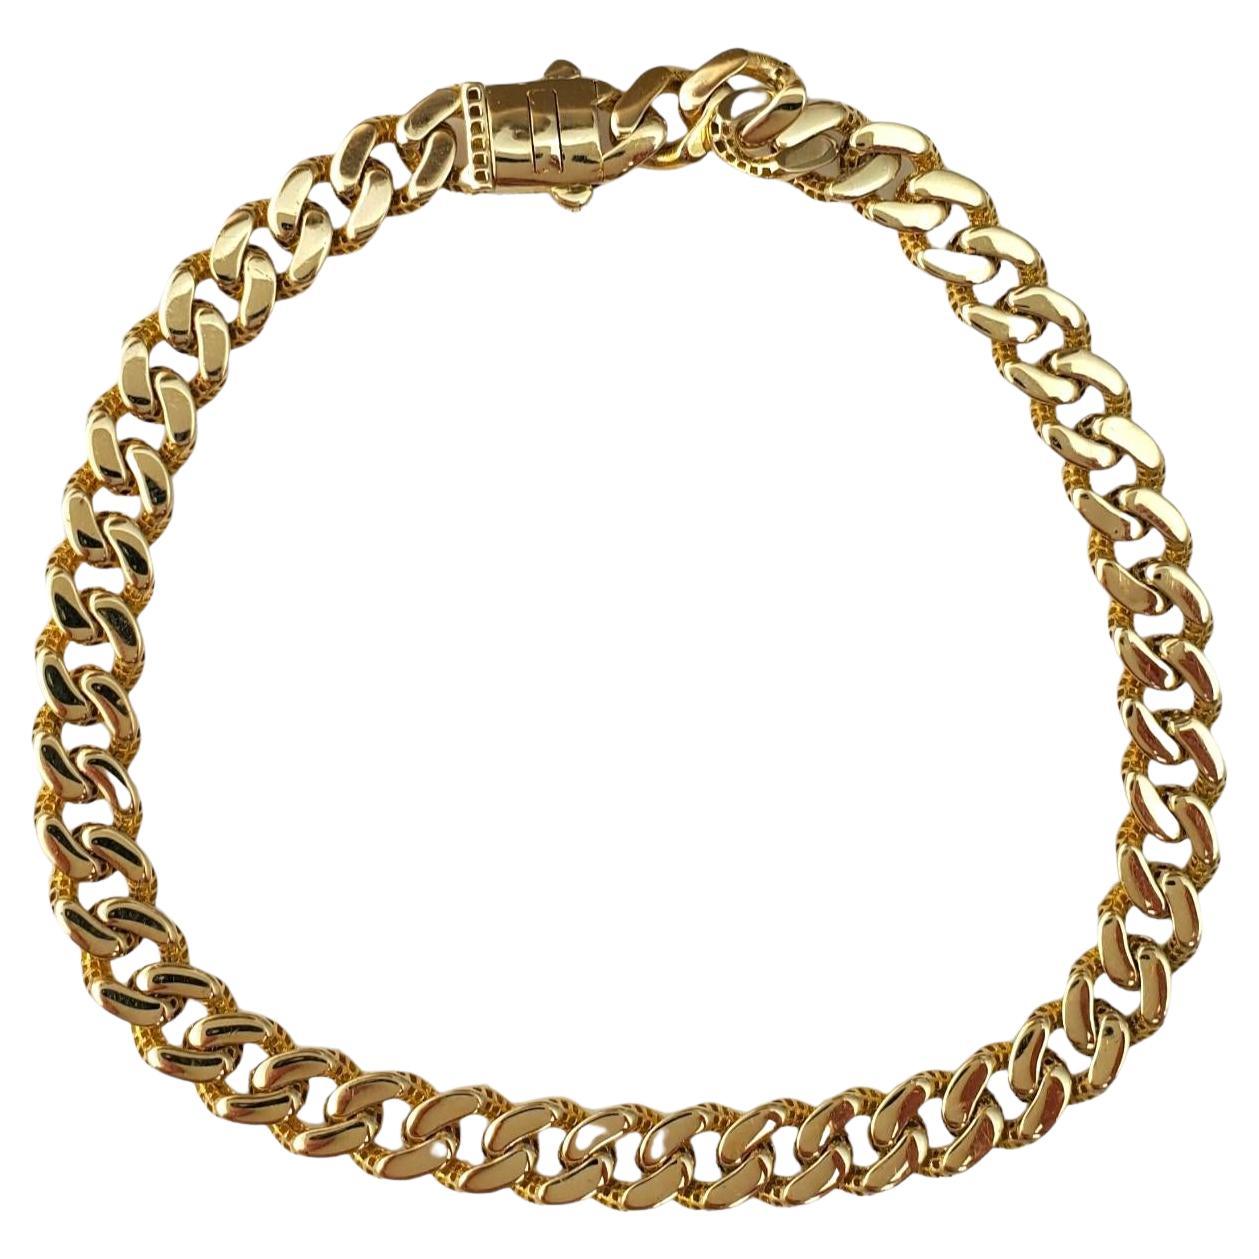 14K Yellow Gold Curb Link Chain Bracelet #16512